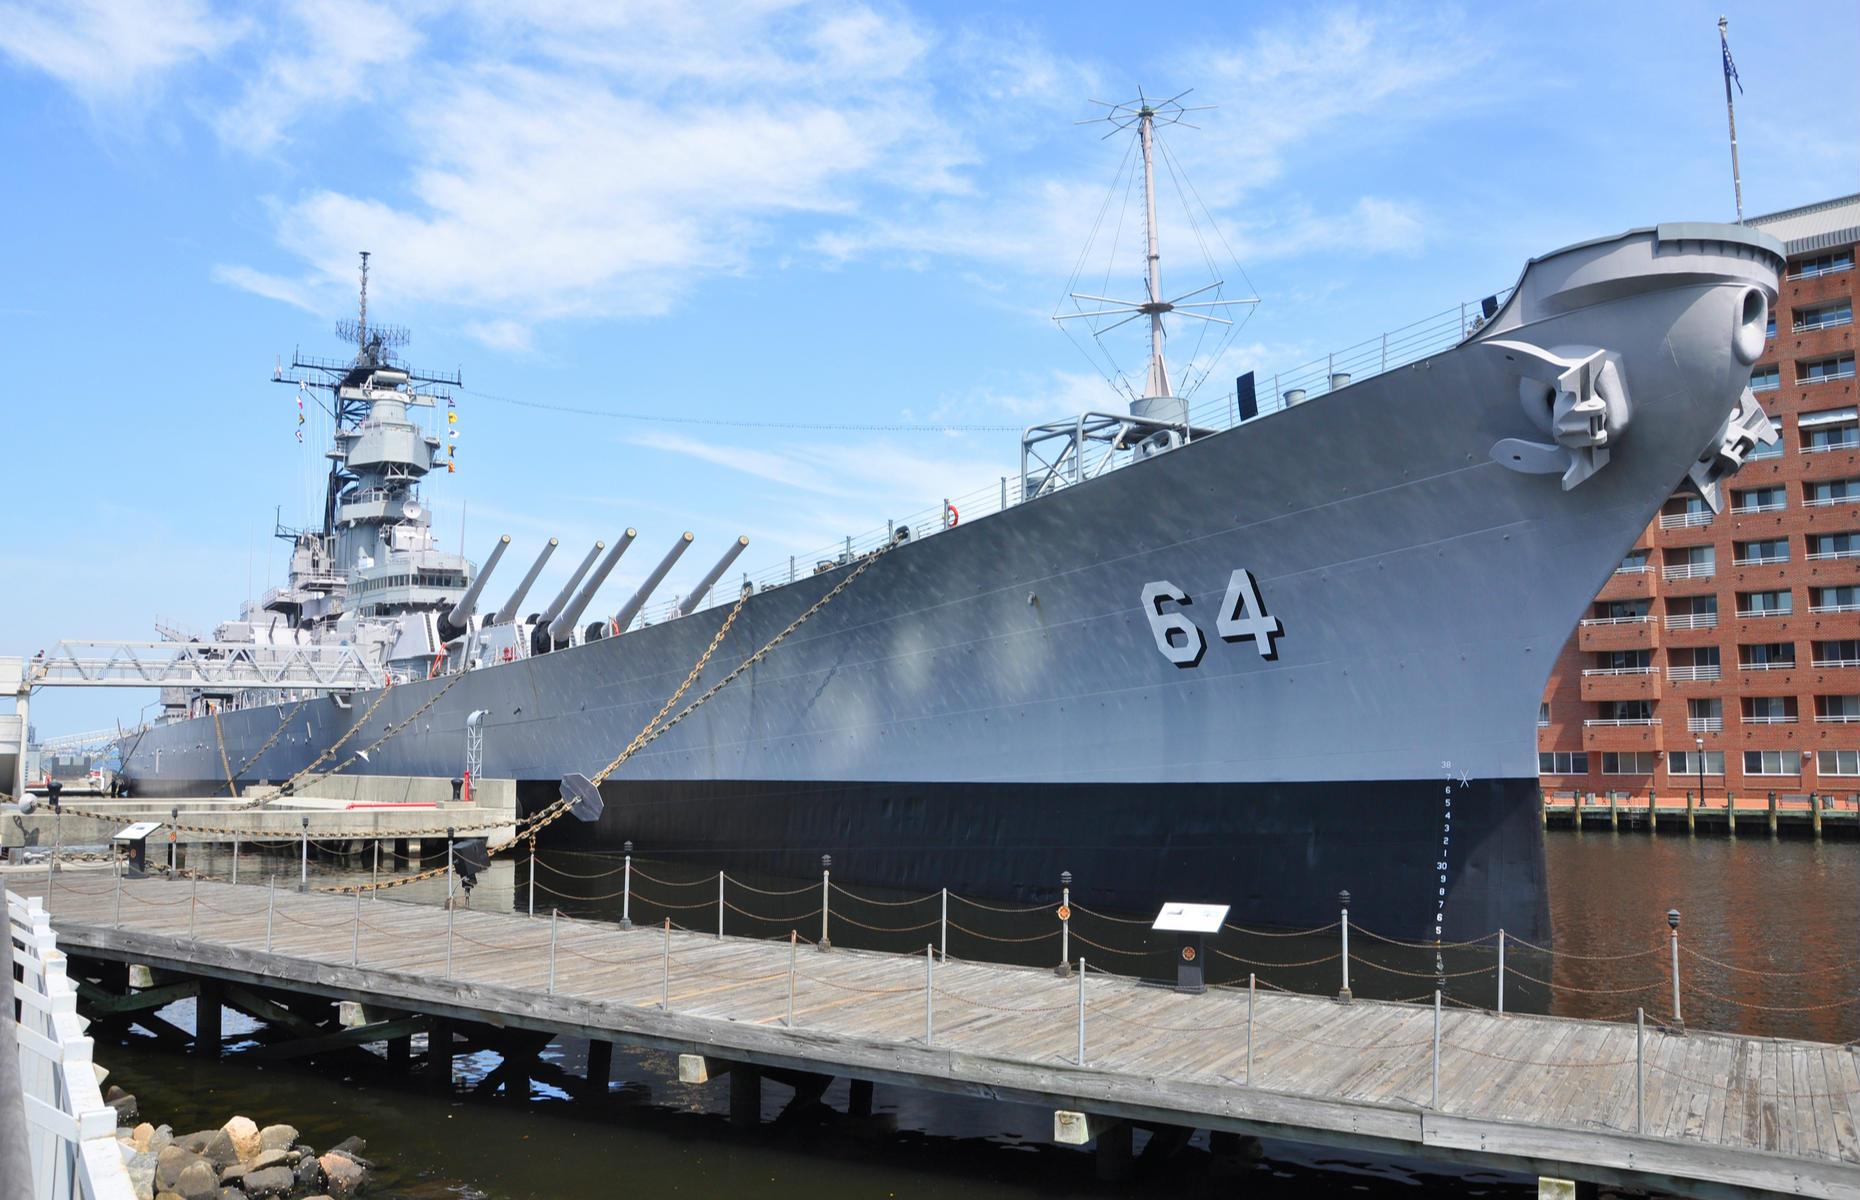 <p>One of the largest and last battleships ever built by the US Navy in 1941, the USS Wisconsin is vast. The ship was awarded five battle stars for her service in the Second World War, and a Combat Action Ribbon for the Korean War. She can now be visited in Norfolk, a waterfront city in southeastern Virginia, which is home to the world’s biggest naval base.</p>